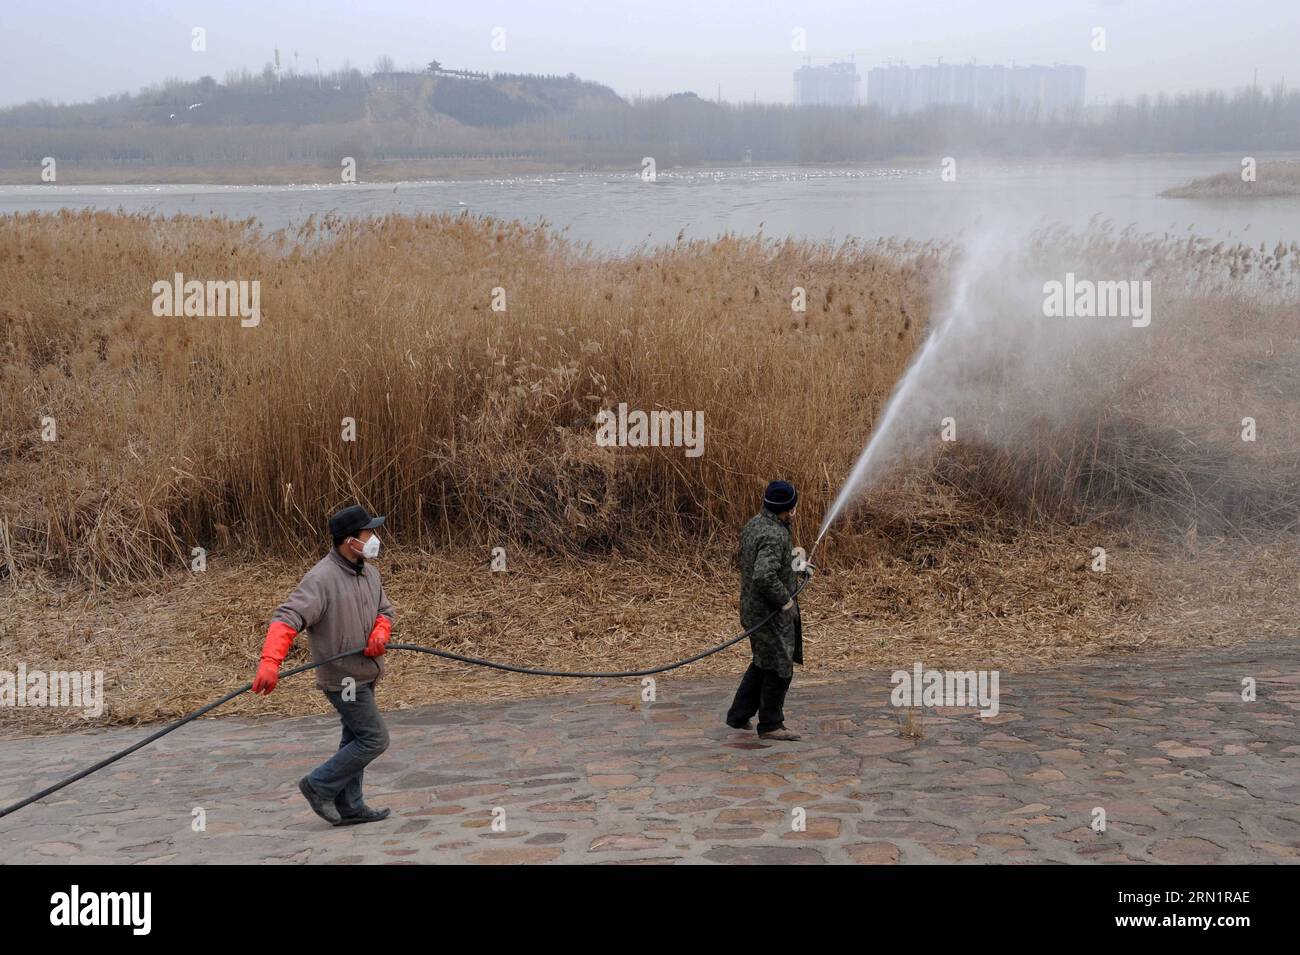 AKTUELLES ZEITGESCHEHEN China - Vogelgrippe in der Henan Provinz festgestellt (150117) -- ZHENGZHOU, Jan. 17, 2015 -- Staff members disinfect the surrounding areas at the Sanmenxia Reservoir Area of the Yellow River, central China s Henan Province, Jan. 17, 2015. A total of 93 wild birds including swans and wild ducks had died in the area as of Jan. 14. According to the National Bird Flu Reference Laboratory, the H5N1 virus, a highly contagious strain of bird flu, has caused deaths in the Sanmenxia Reservoir Area, which is a winter habitat for swans that migrate from Siberia in Russia. Local g Stock Photo